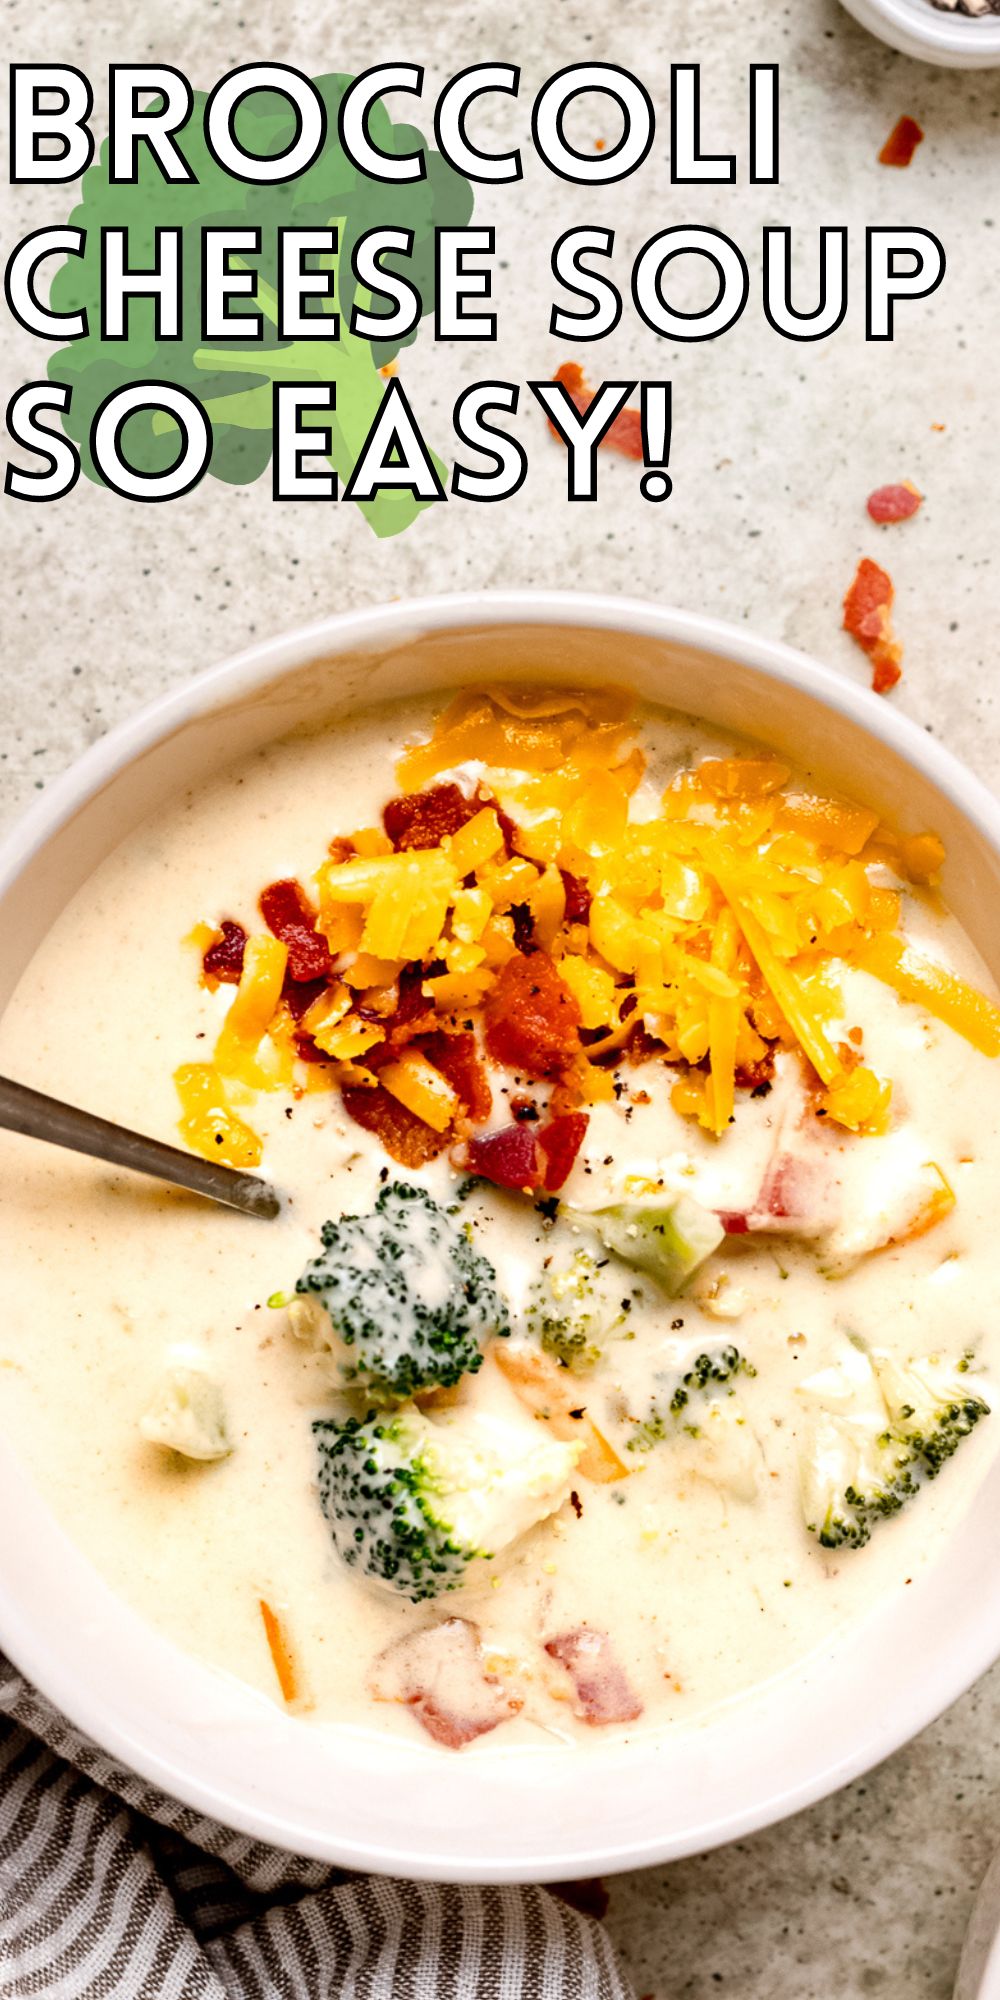 Loaded Broccoli Cheese Soup Recipe - I Wash You Dry